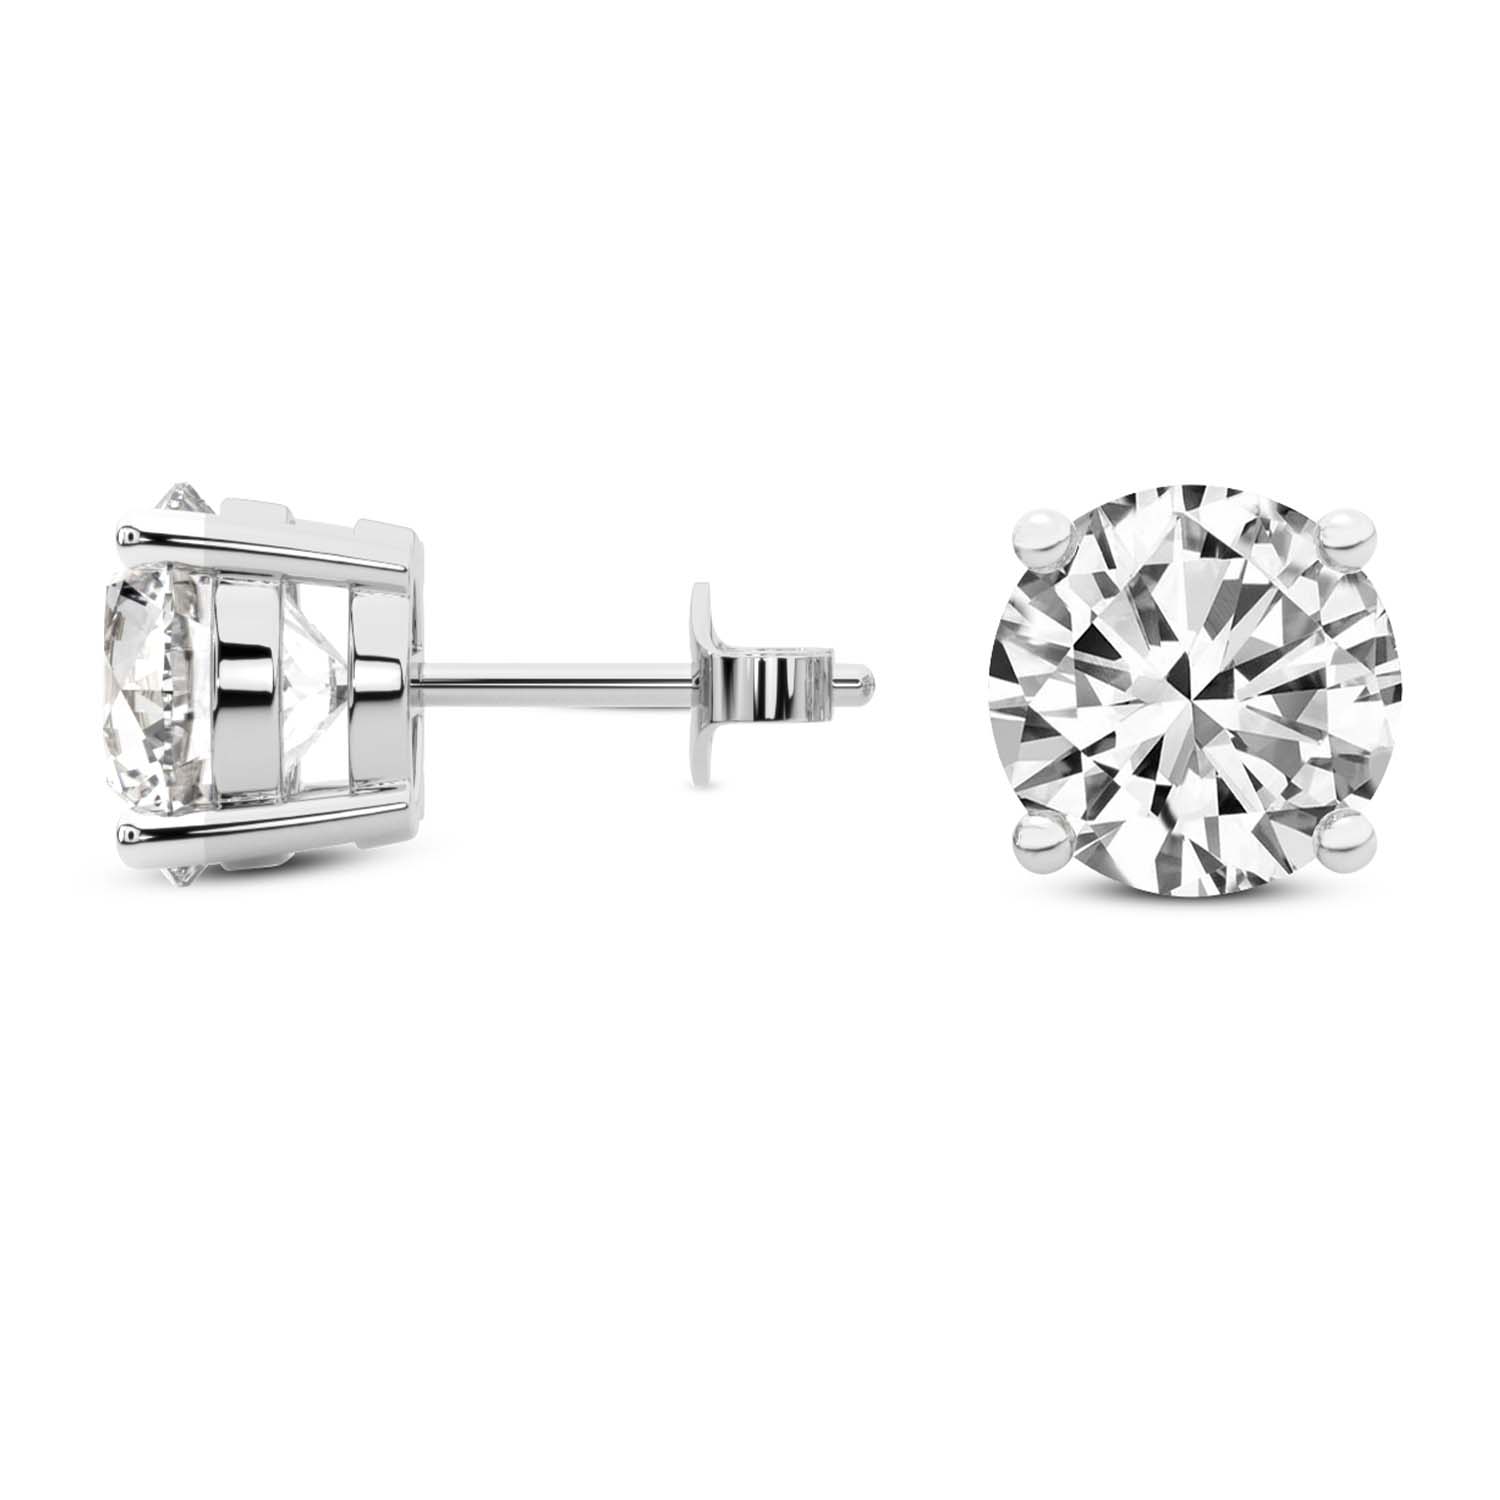 4 Prong Round Lab Diamond Stud Earrings white gold earring, small left view